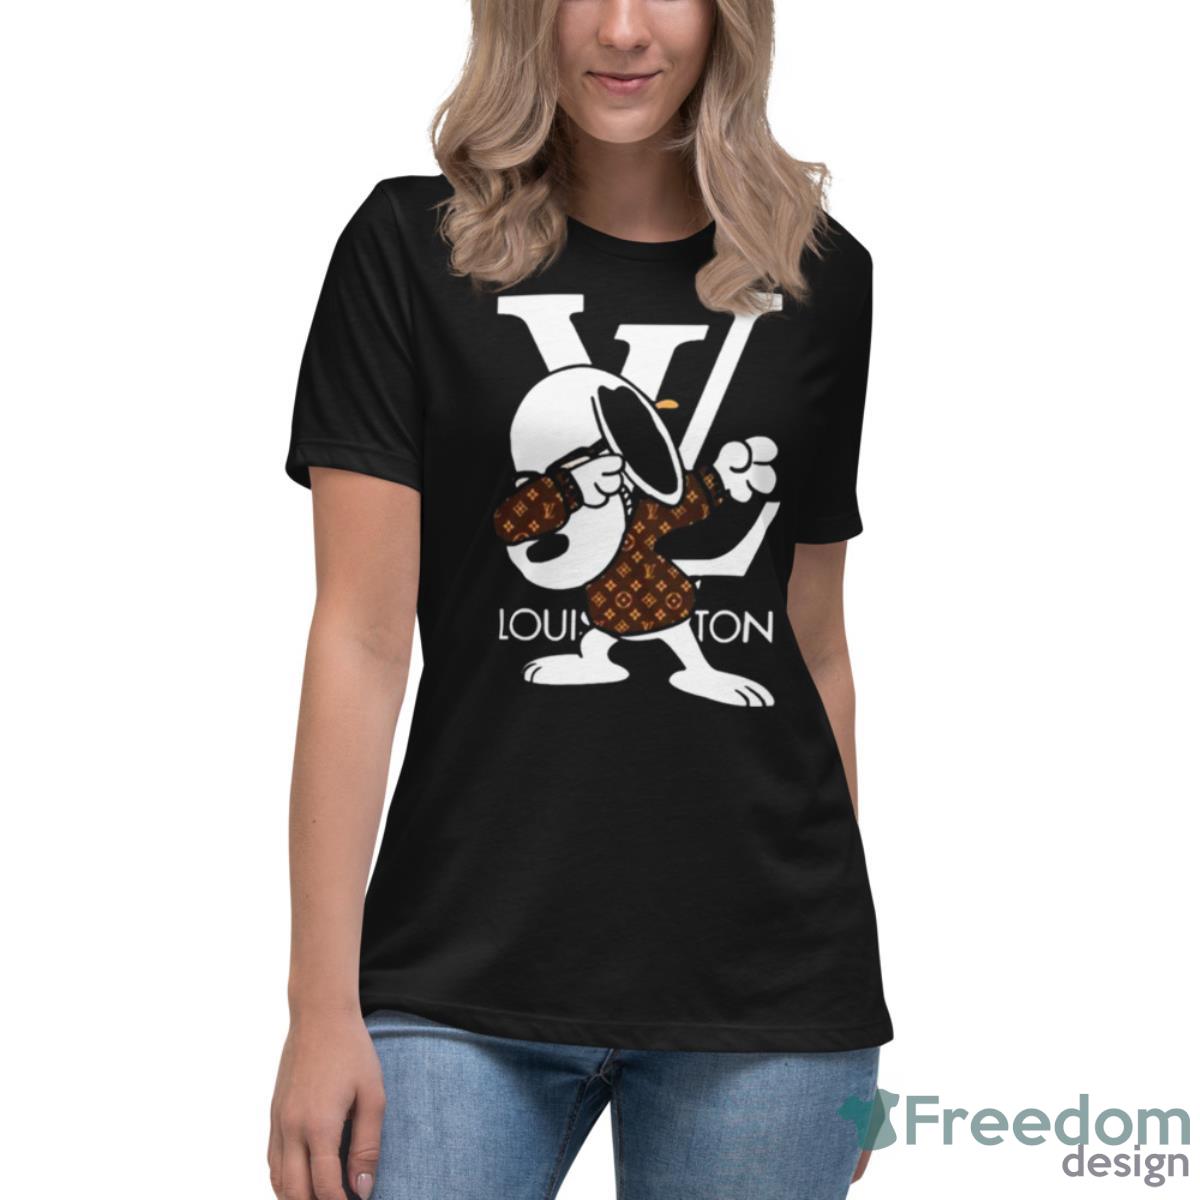 Snoopy wear Louis Vuitton and dabbing shirt, hoodie, sweater, long sleeve  and tank top